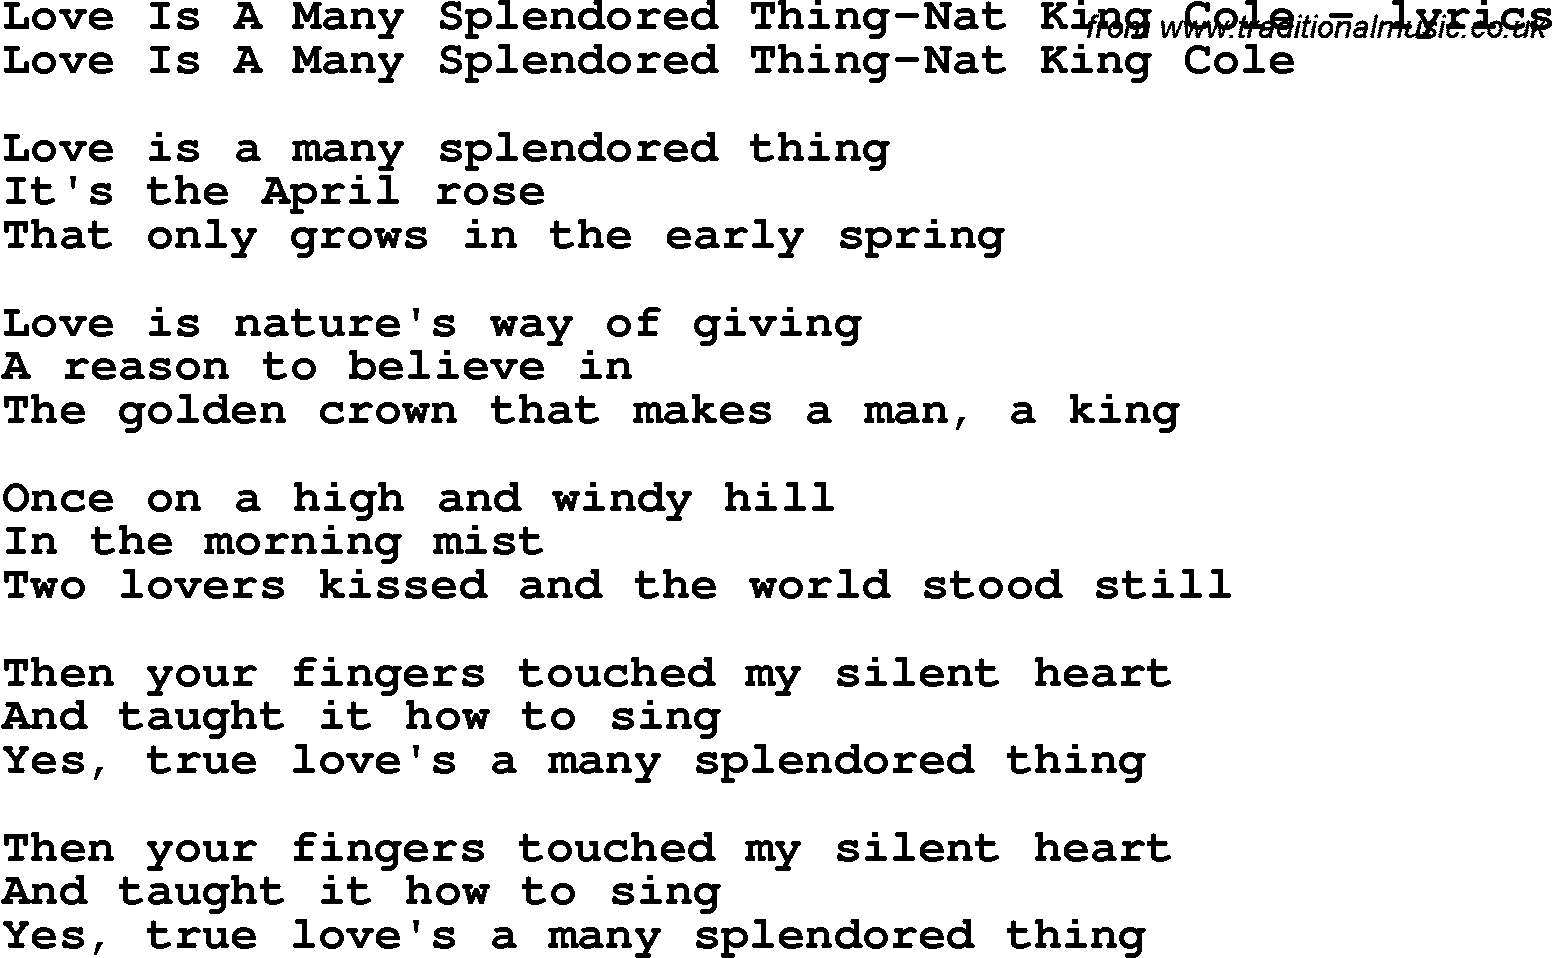 Love Song Lyrics for: Love Is A Many Splendored Thing-Nat King Cole